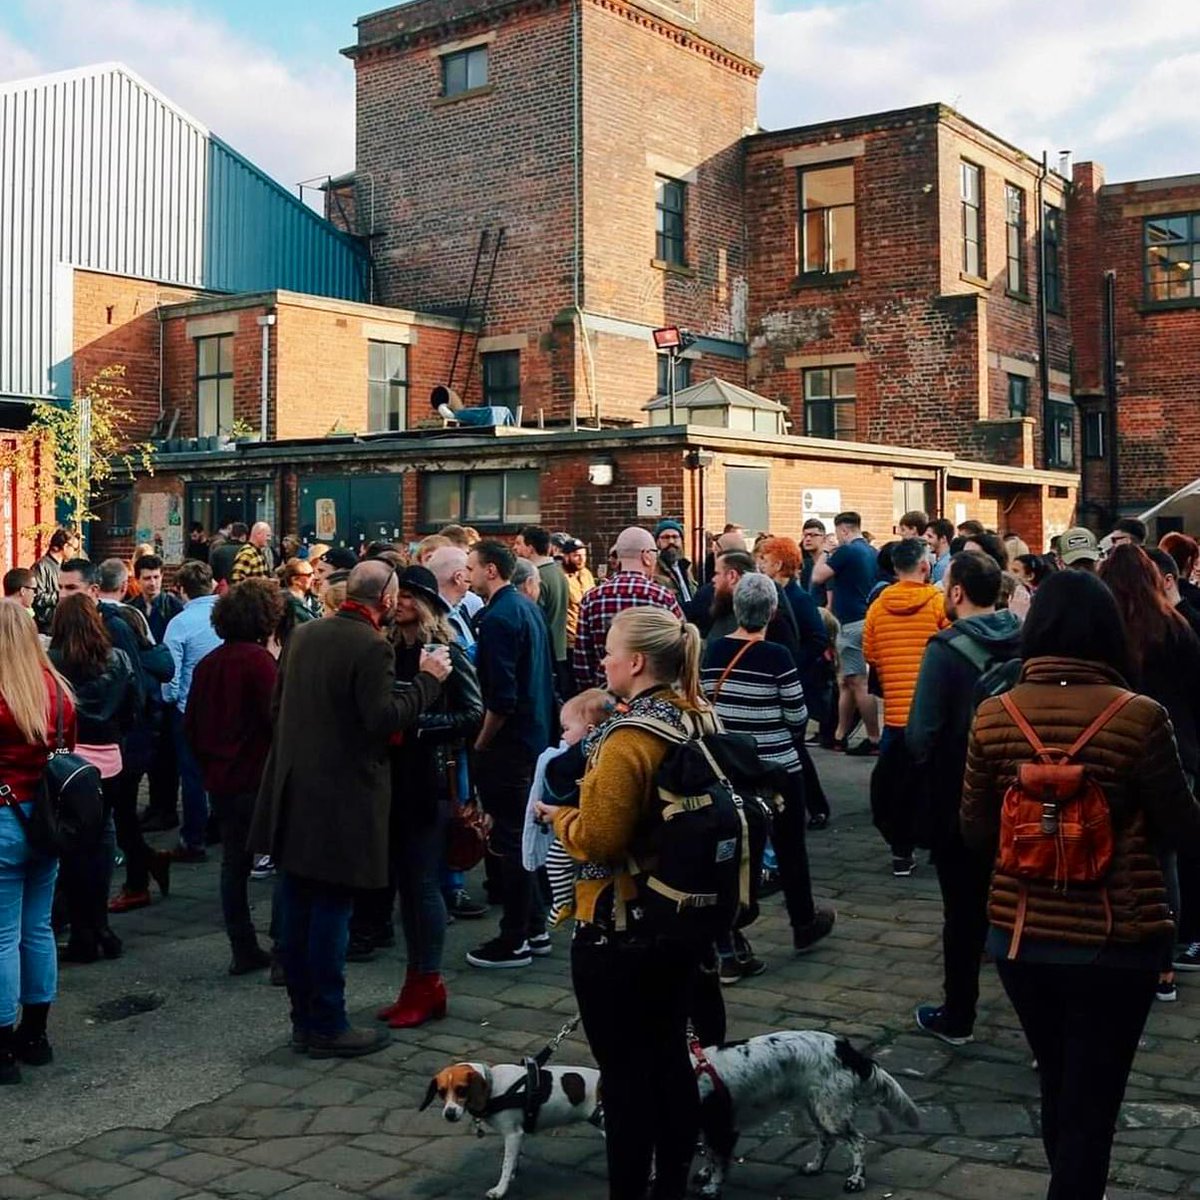 May is here, bringing a whole load of great #Sheffield events and festivals over coming weeks!

Starting this weekend - there’s the World Snooker finals, with the return of the @MarketPlaceEuro International Market in @sheffcitycentre, plus @openupsheffield, @peddlermkt and